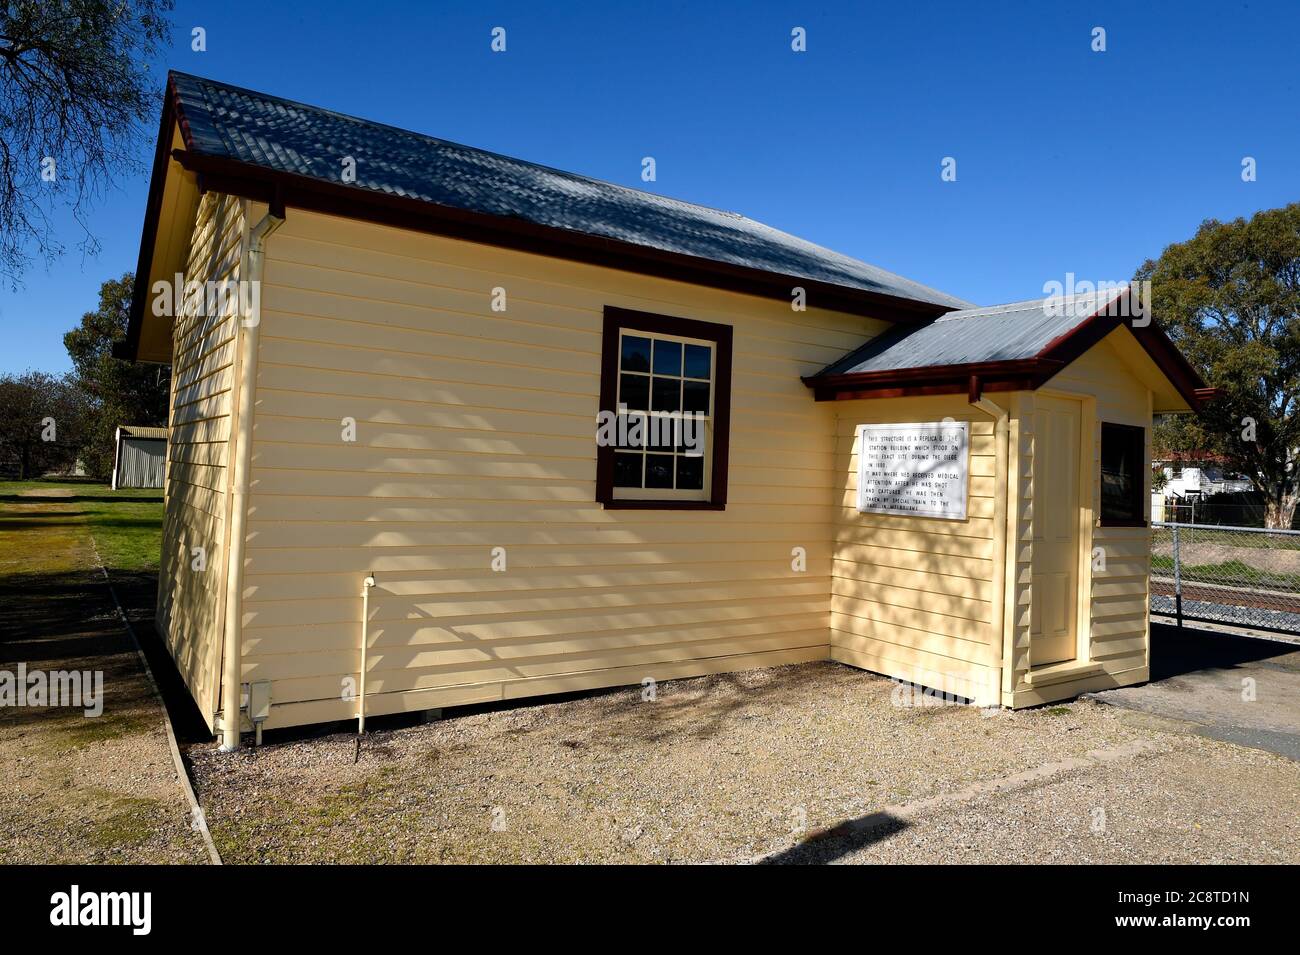 Glenrowan, Victoria. The Glenrowan Station building where the bushranger and outlaw Ned Kelly, wounded by gunshots, was treated. Stock Photo